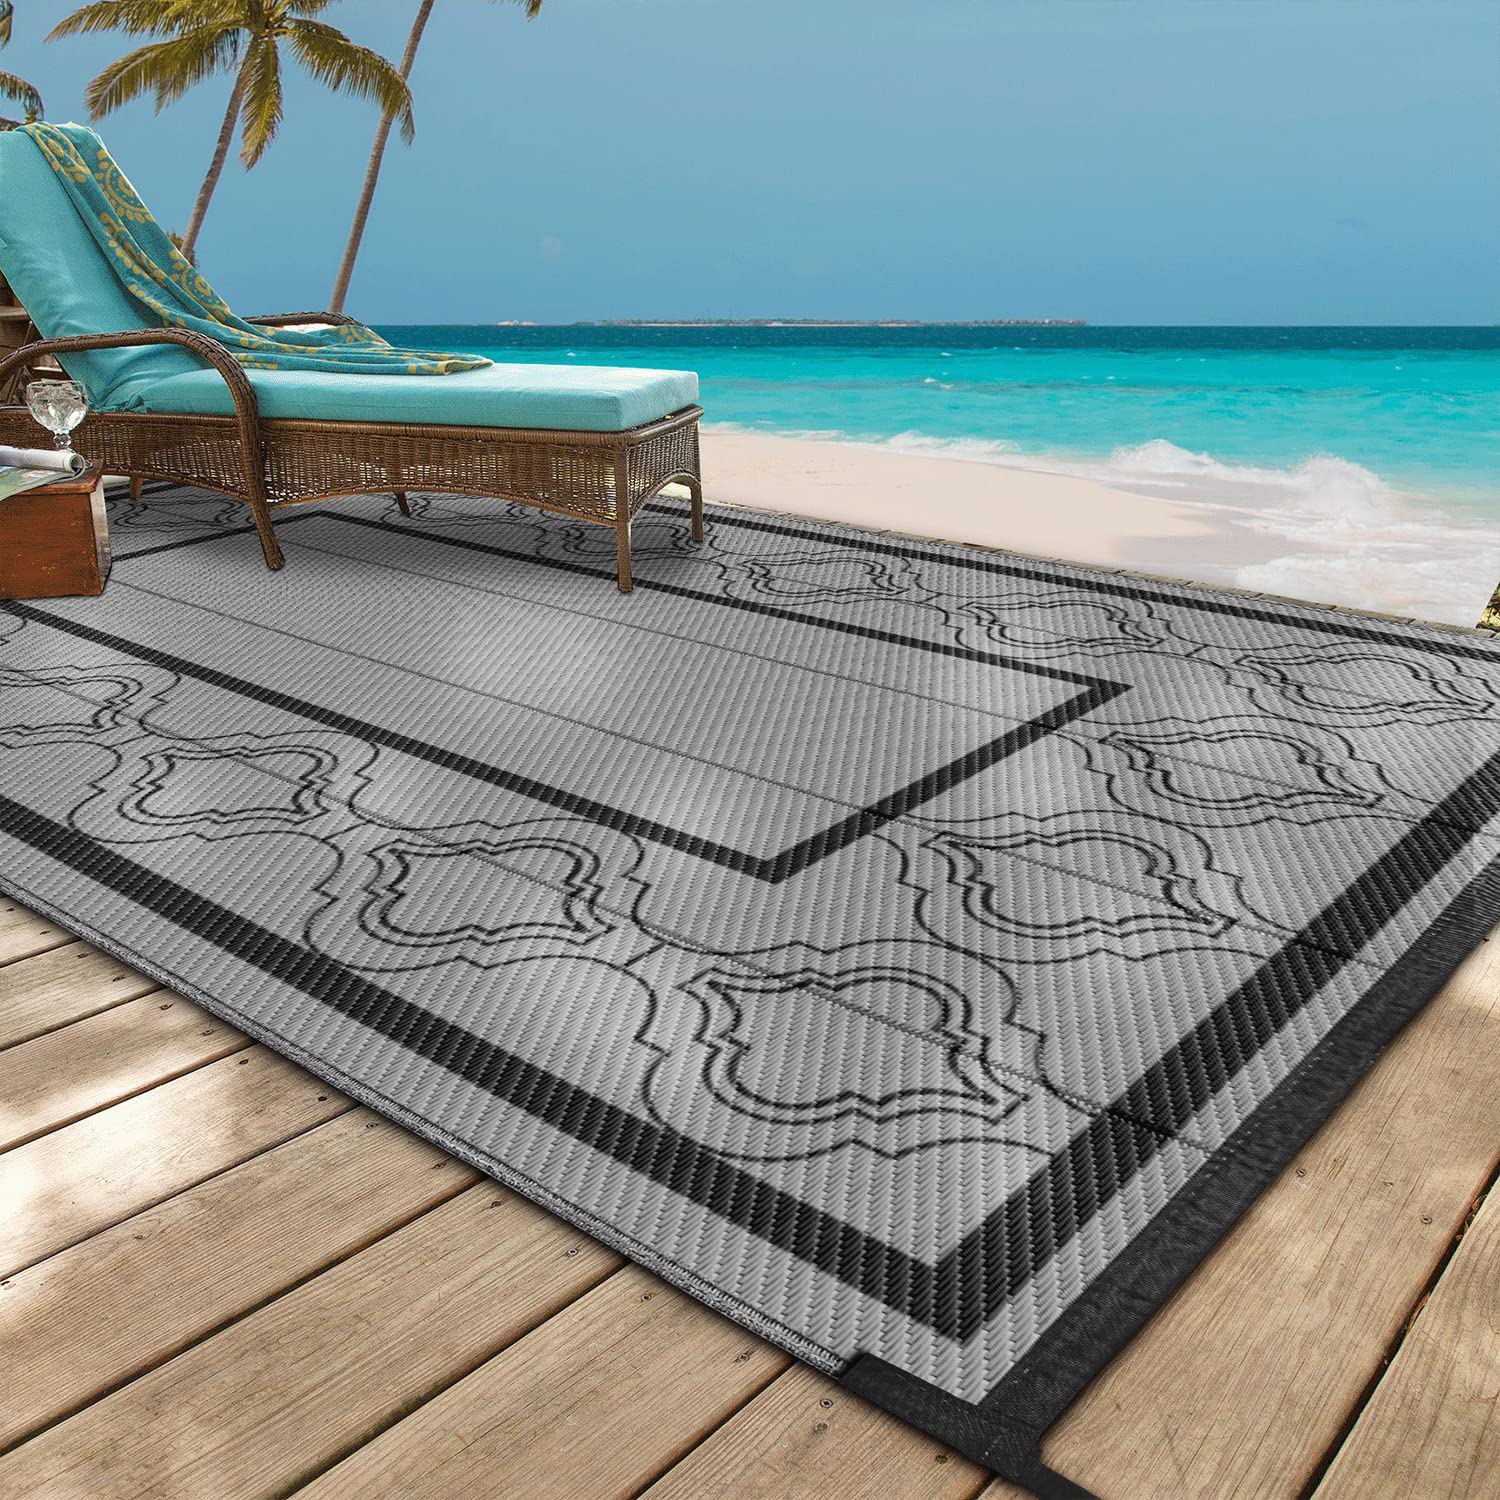 Outdoor Rug Plastic Patio mat - 9X12ft Waterproof Camping Carpet Outside Straw Area Rugs for RV,Picnic,Big Cheap Reversible Deck Mats, Indoor Rugs for Balcony,Pool,Backyard,Yard,Foldable Beach Mat